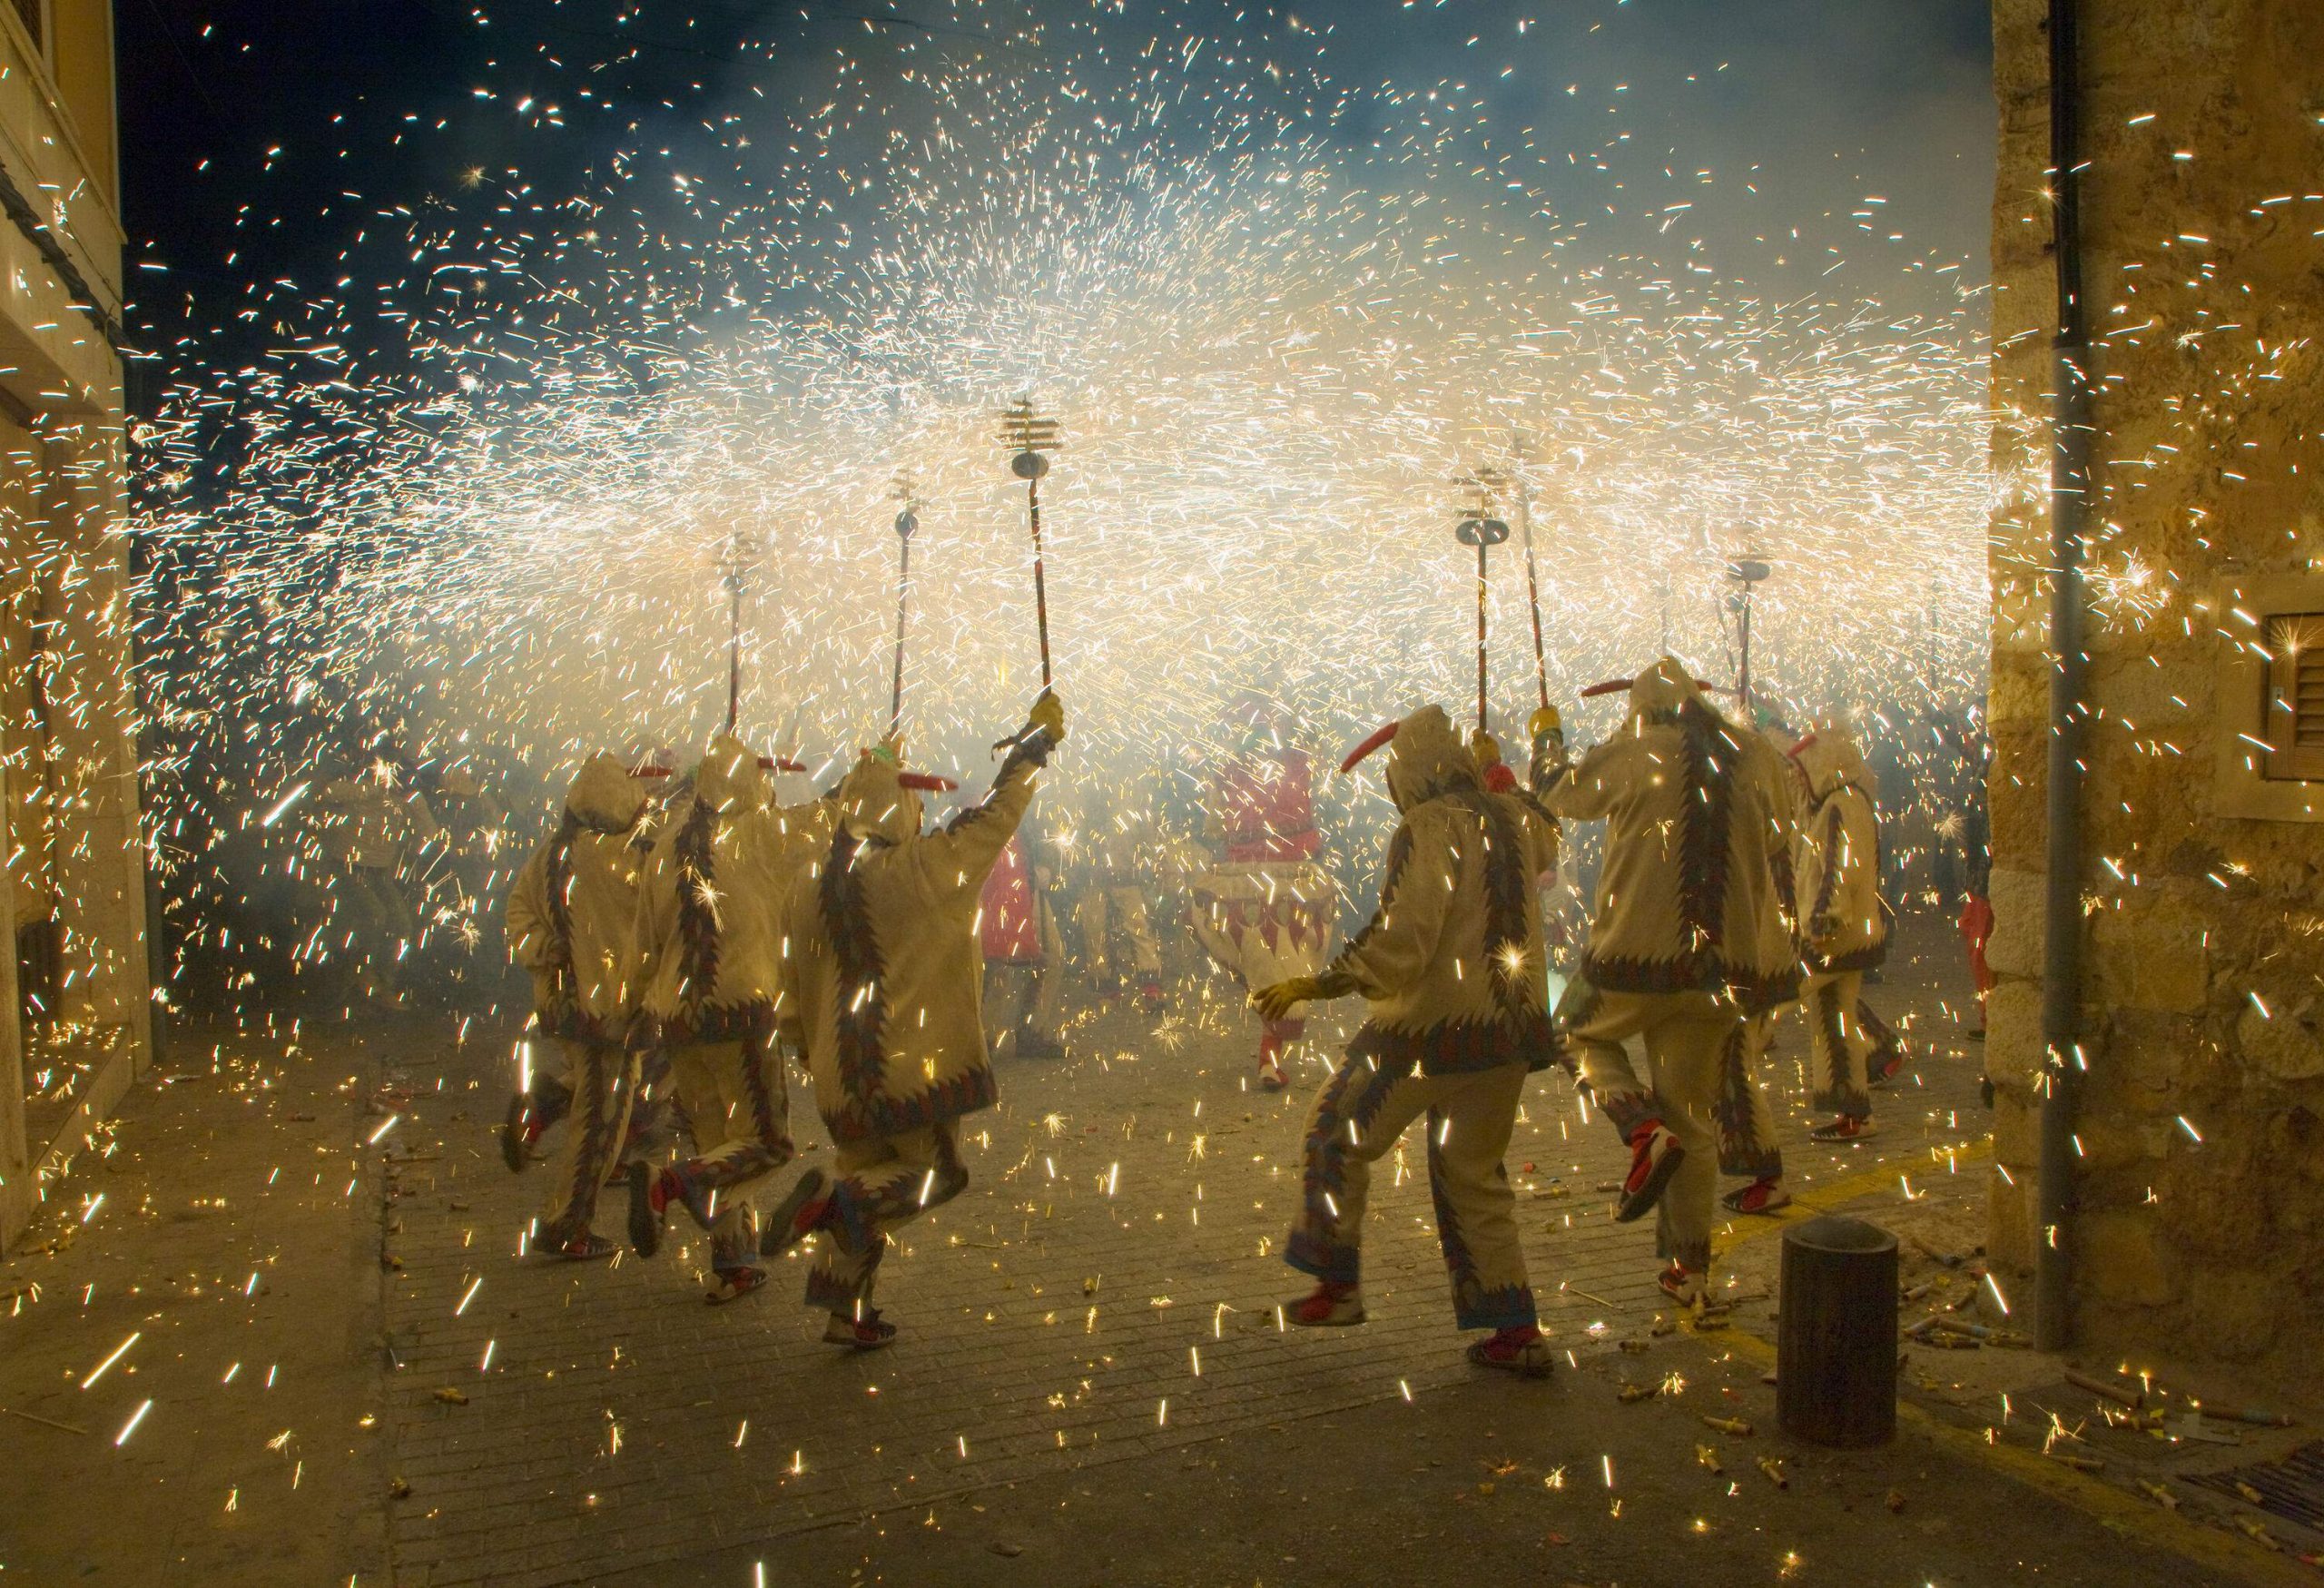 A festival in which revellers dressed as the devil dance in the streets while holding a stick that ignites fireworks.